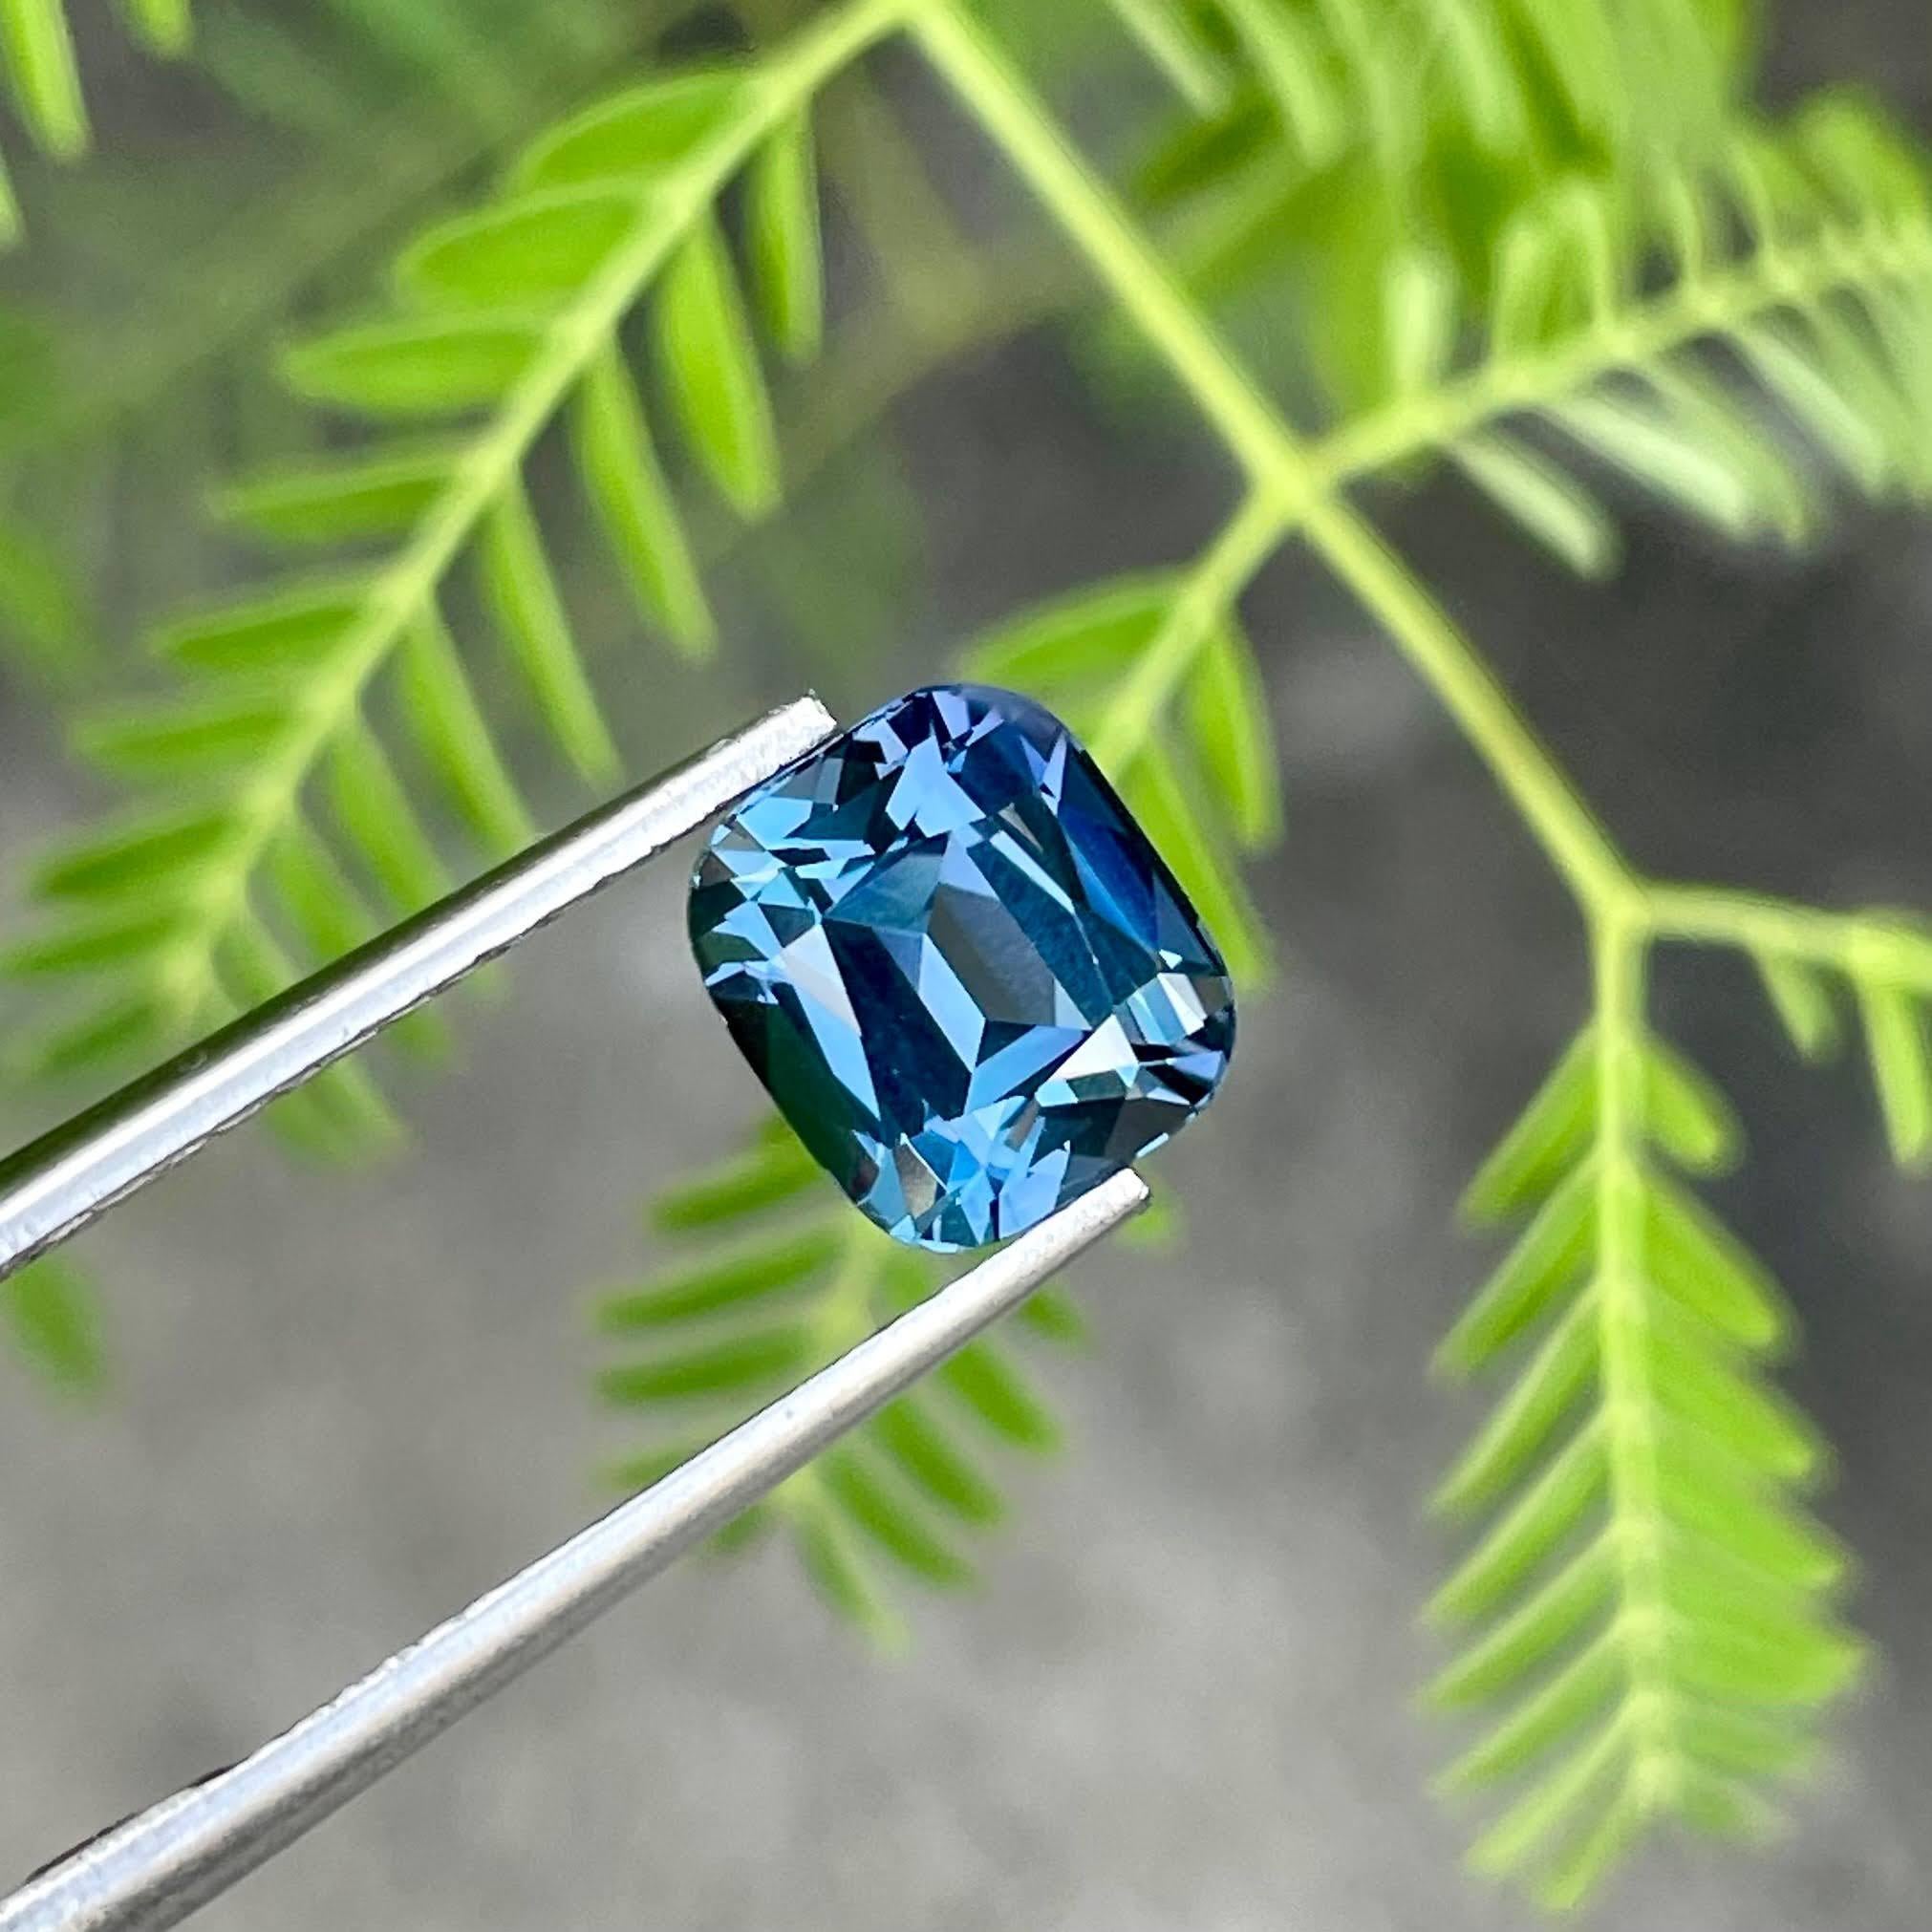 Weight 3.13 carats 
Dim 8.3x7.25x5.90
Treatment Not heated
Origin Tanzania
Clarity Loop Clean
Shape Cushion
Cut Step Cushion




The 3.13 carat Light Blue Spinel Stone is an exquisite and captivating gemstone, showcasing a brilliant Cushion cut that